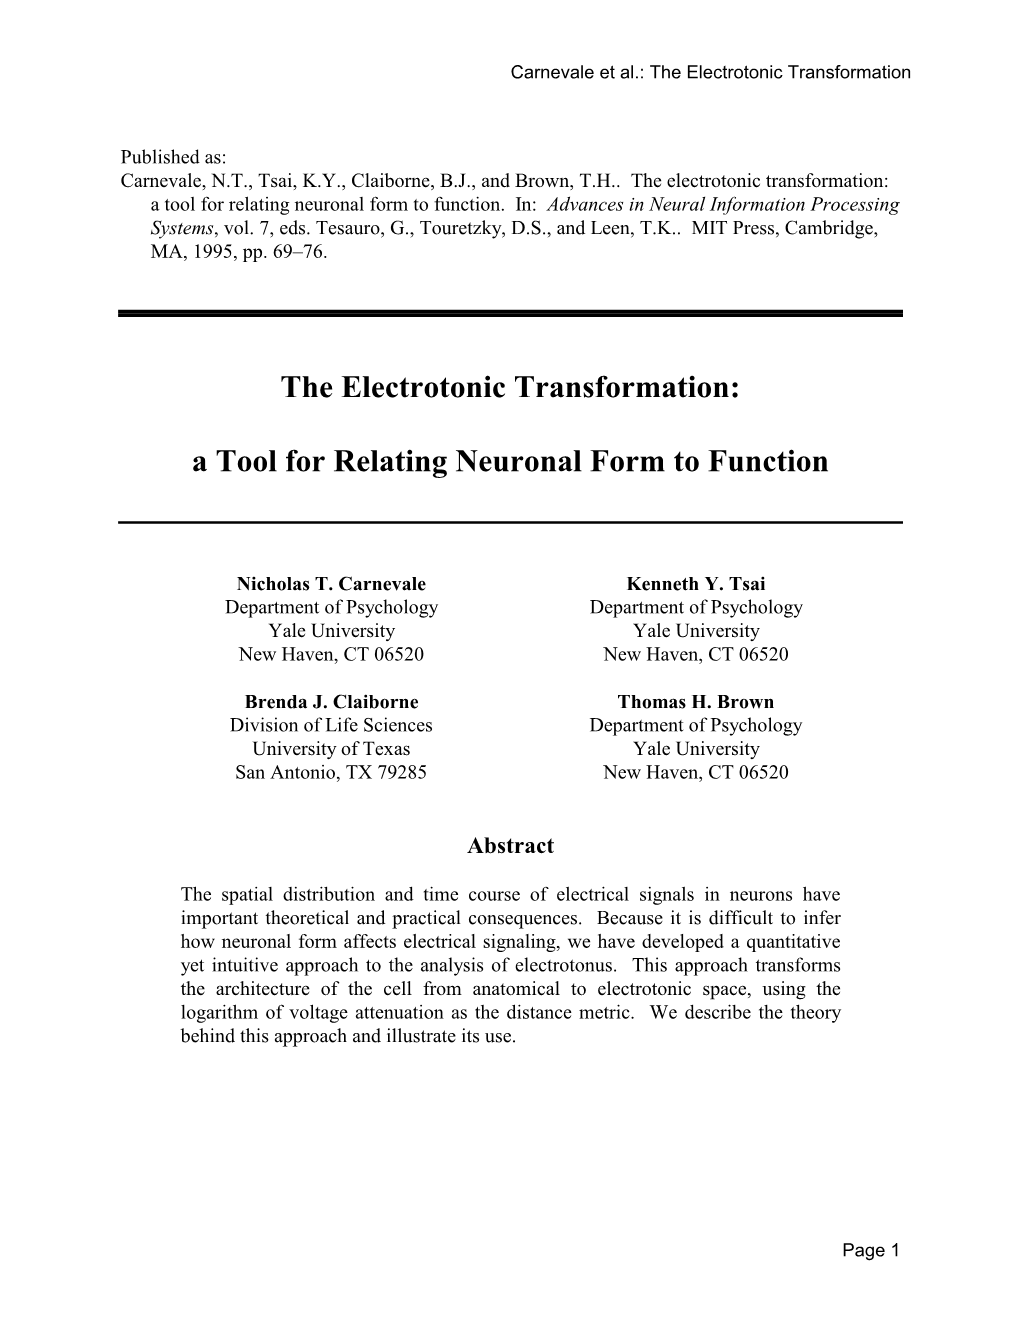 The Electrotonic Transformation